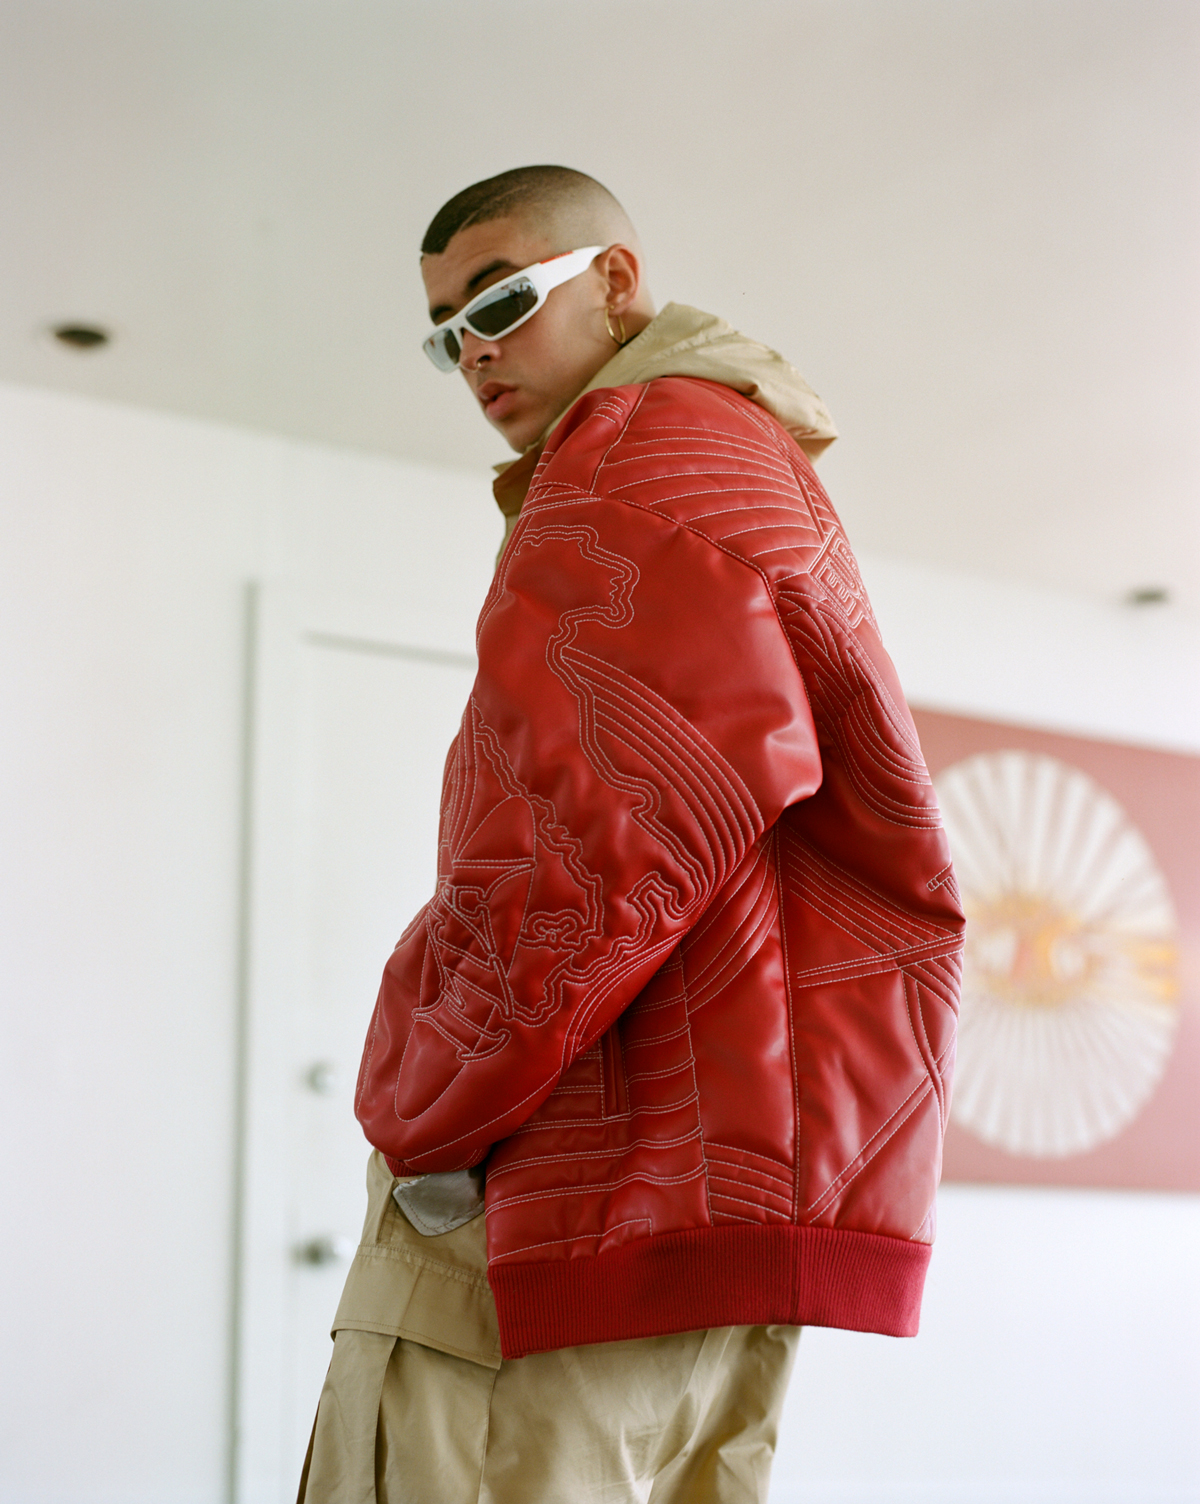 Bad Bunny Tells Rosalía About Sunglasses, Nails, and His Debut Album